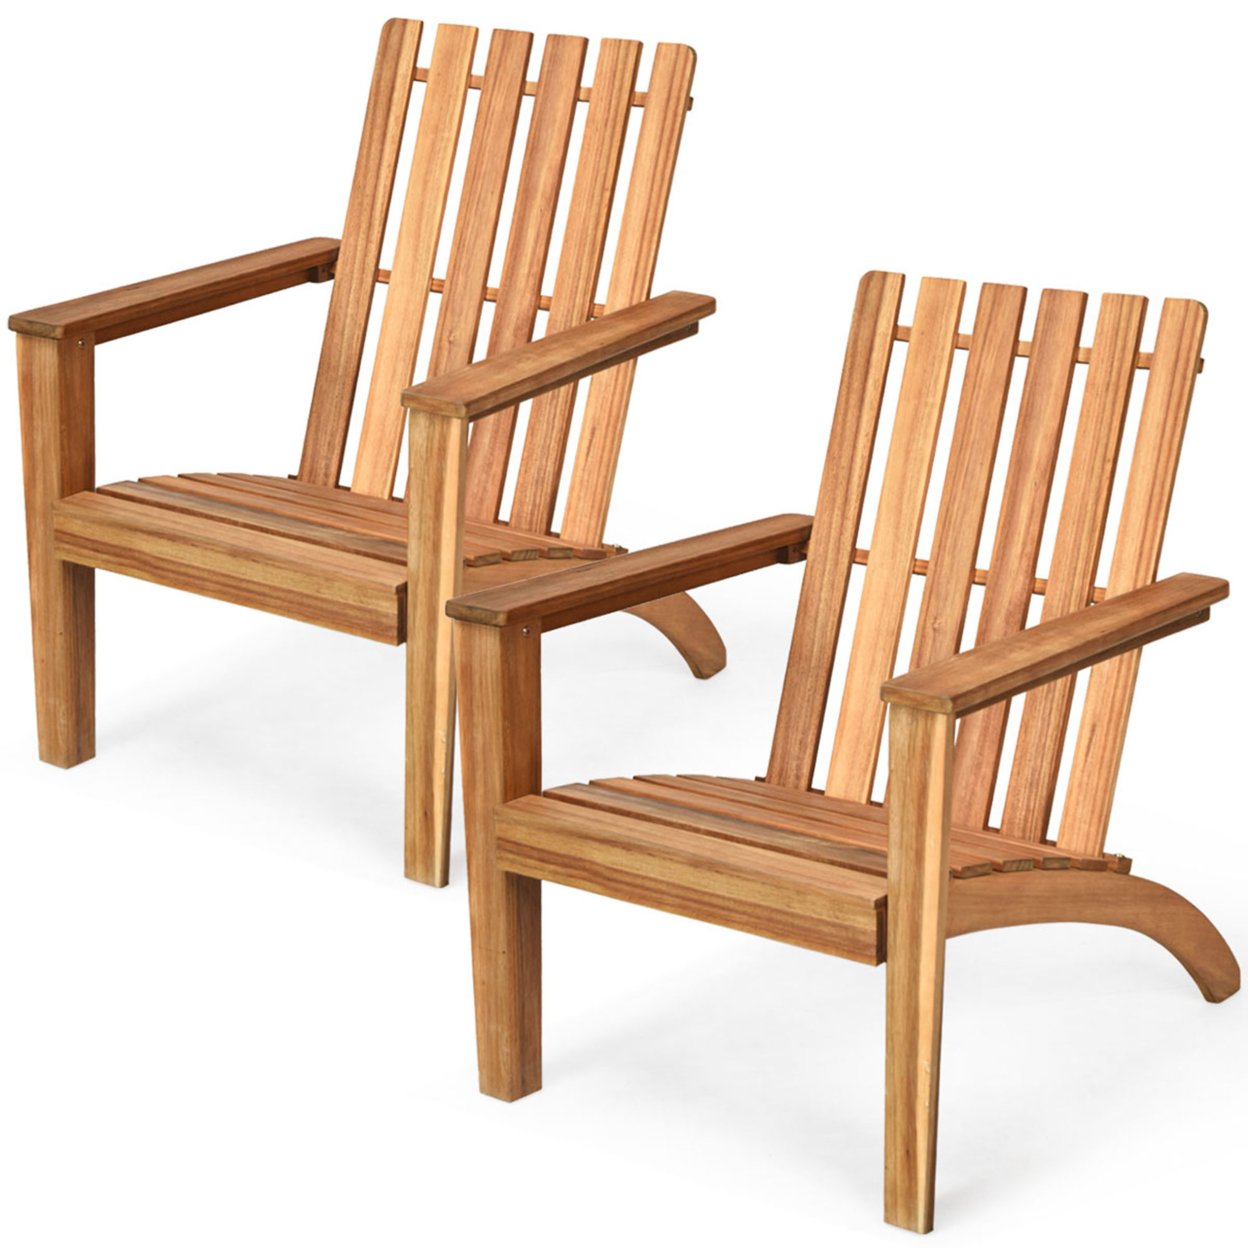 Set Of 2 Outdoor Wooden Adirondack Chair Patio Lounge Chair W/ Armrest Natural